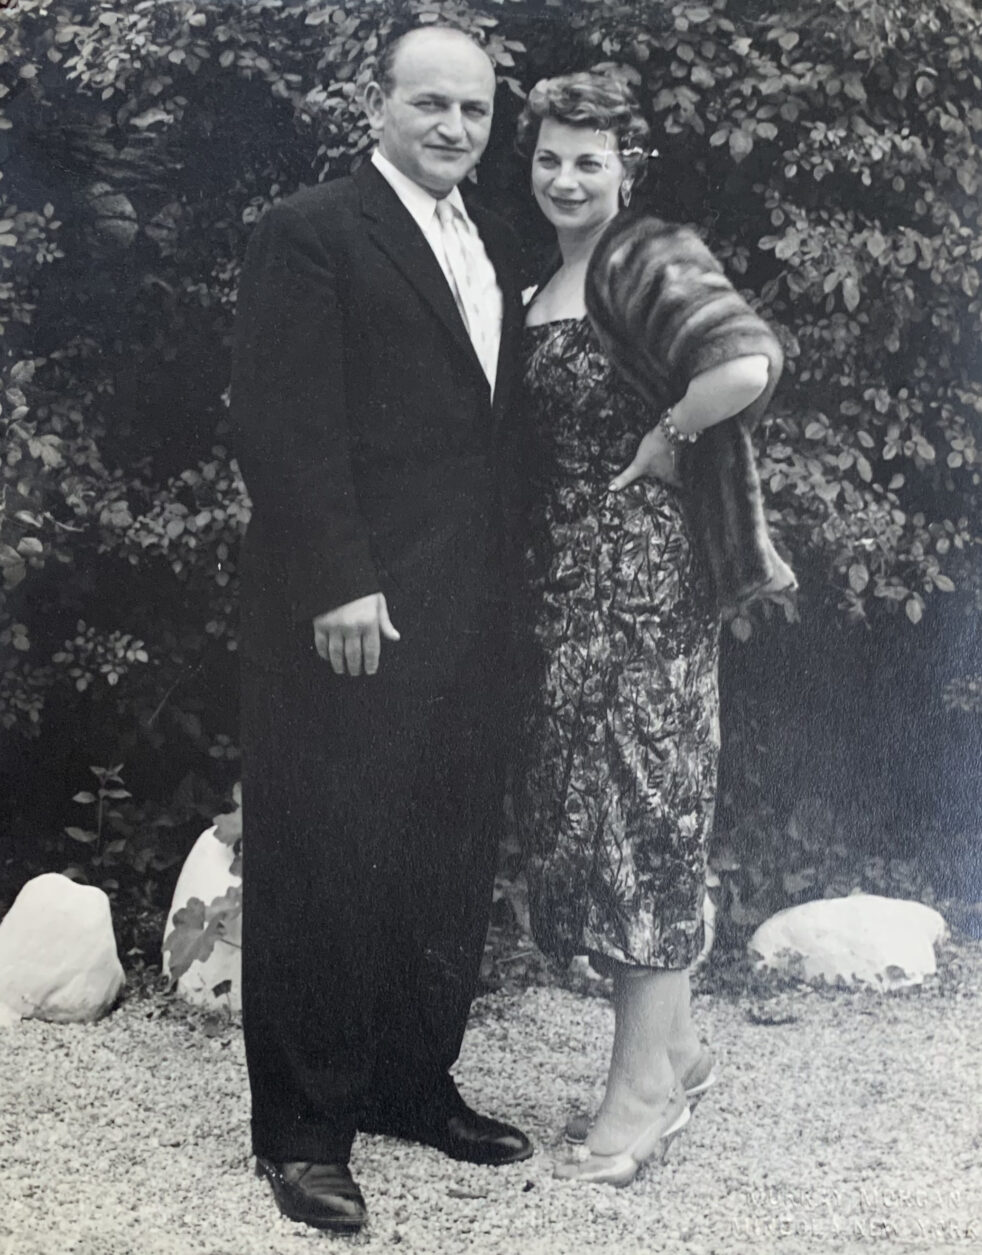 A black and white photo of a man and woman.